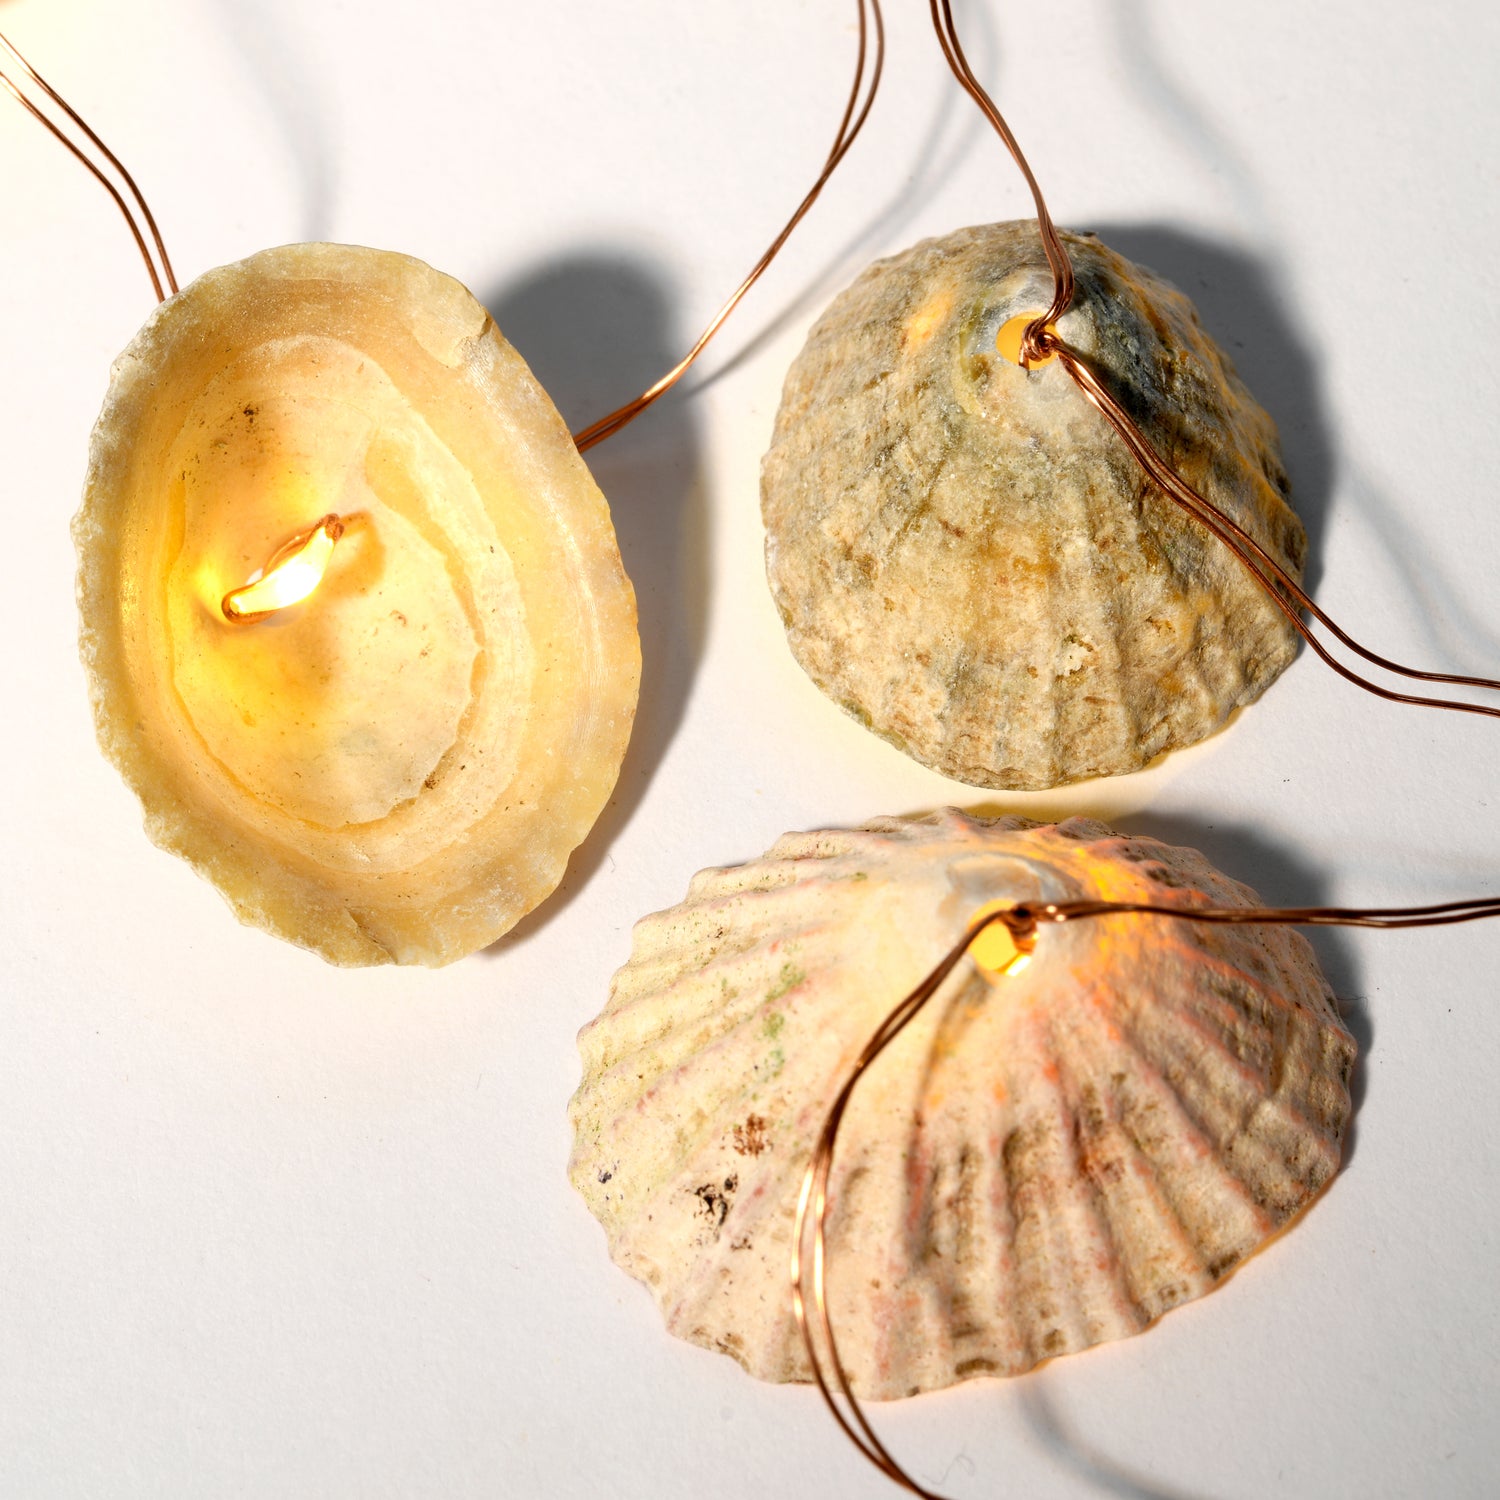 Limpet shell lights